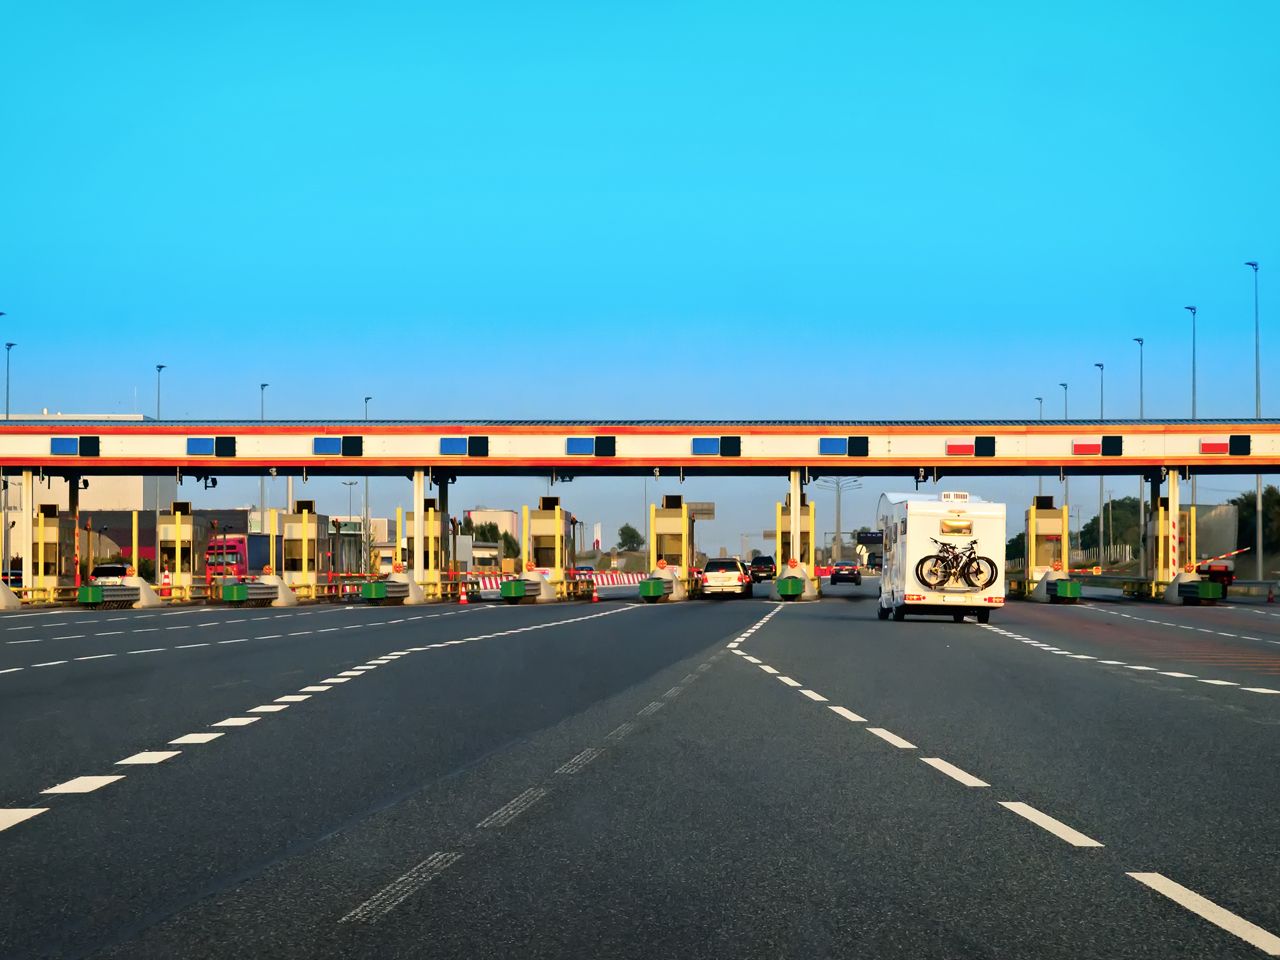 Issuance of senior secured non-convertible debentures by Yedeshi Aurangabad Tollway Limited and Solapur Yedeshi Tollway Limited, toll-road Project SPVs of IRB Infrastructure Trust